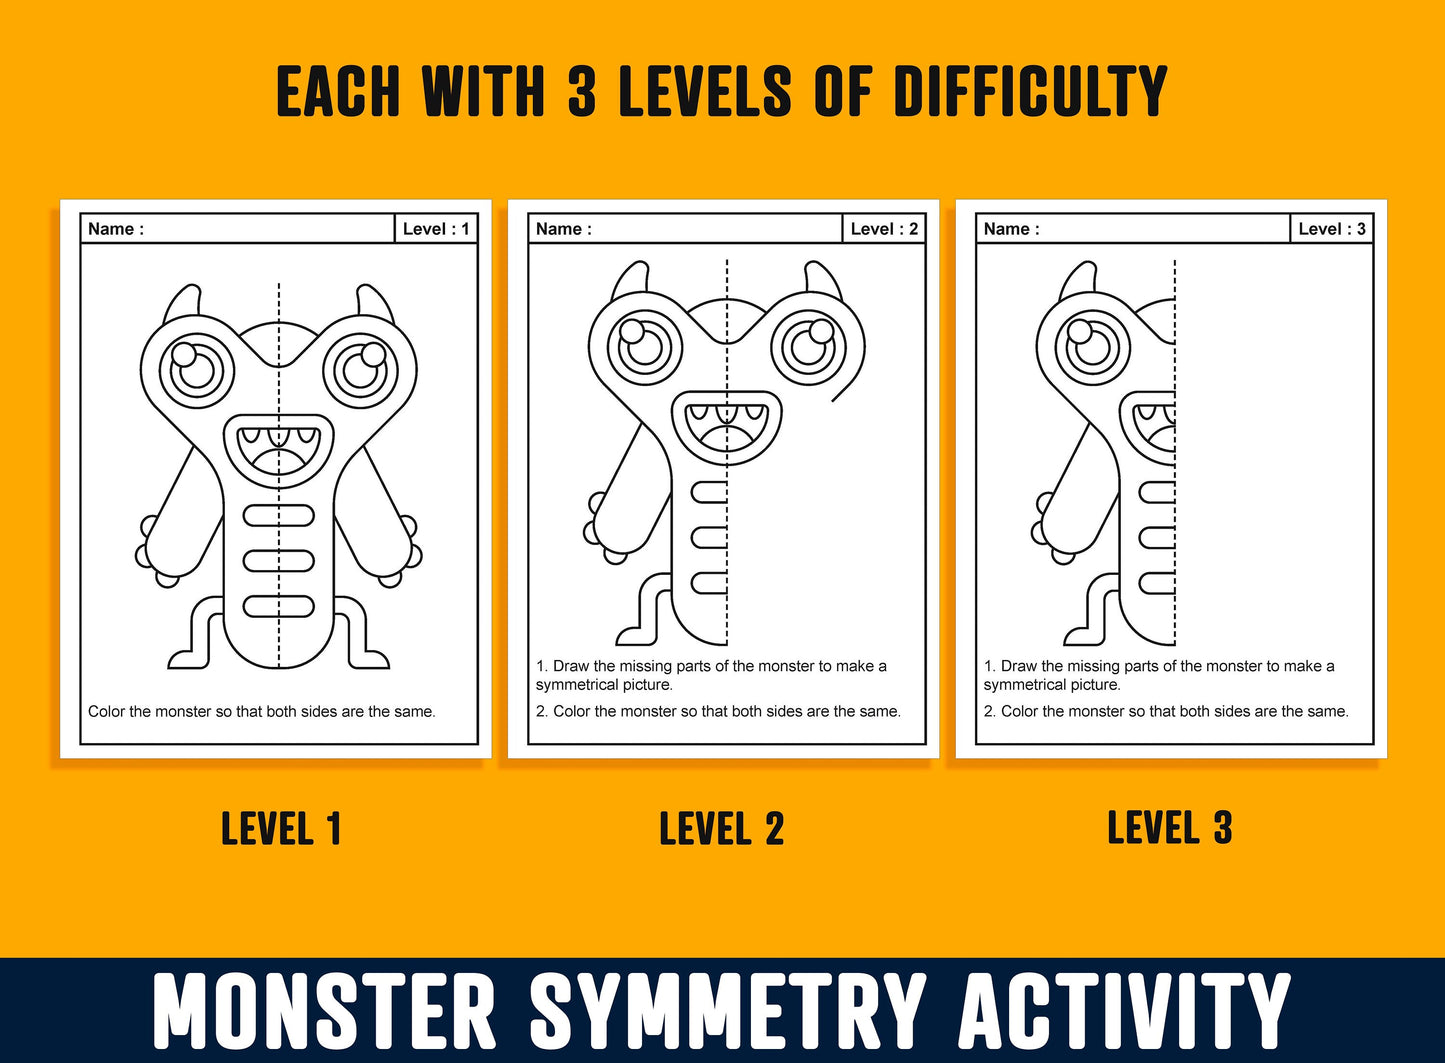 Monsters Symmetry Activity, Monsters Lines of Symmetry Activity, 24 Pages, 8 Designs, Each With 3 Levels of Difficulty, Math/Art Center